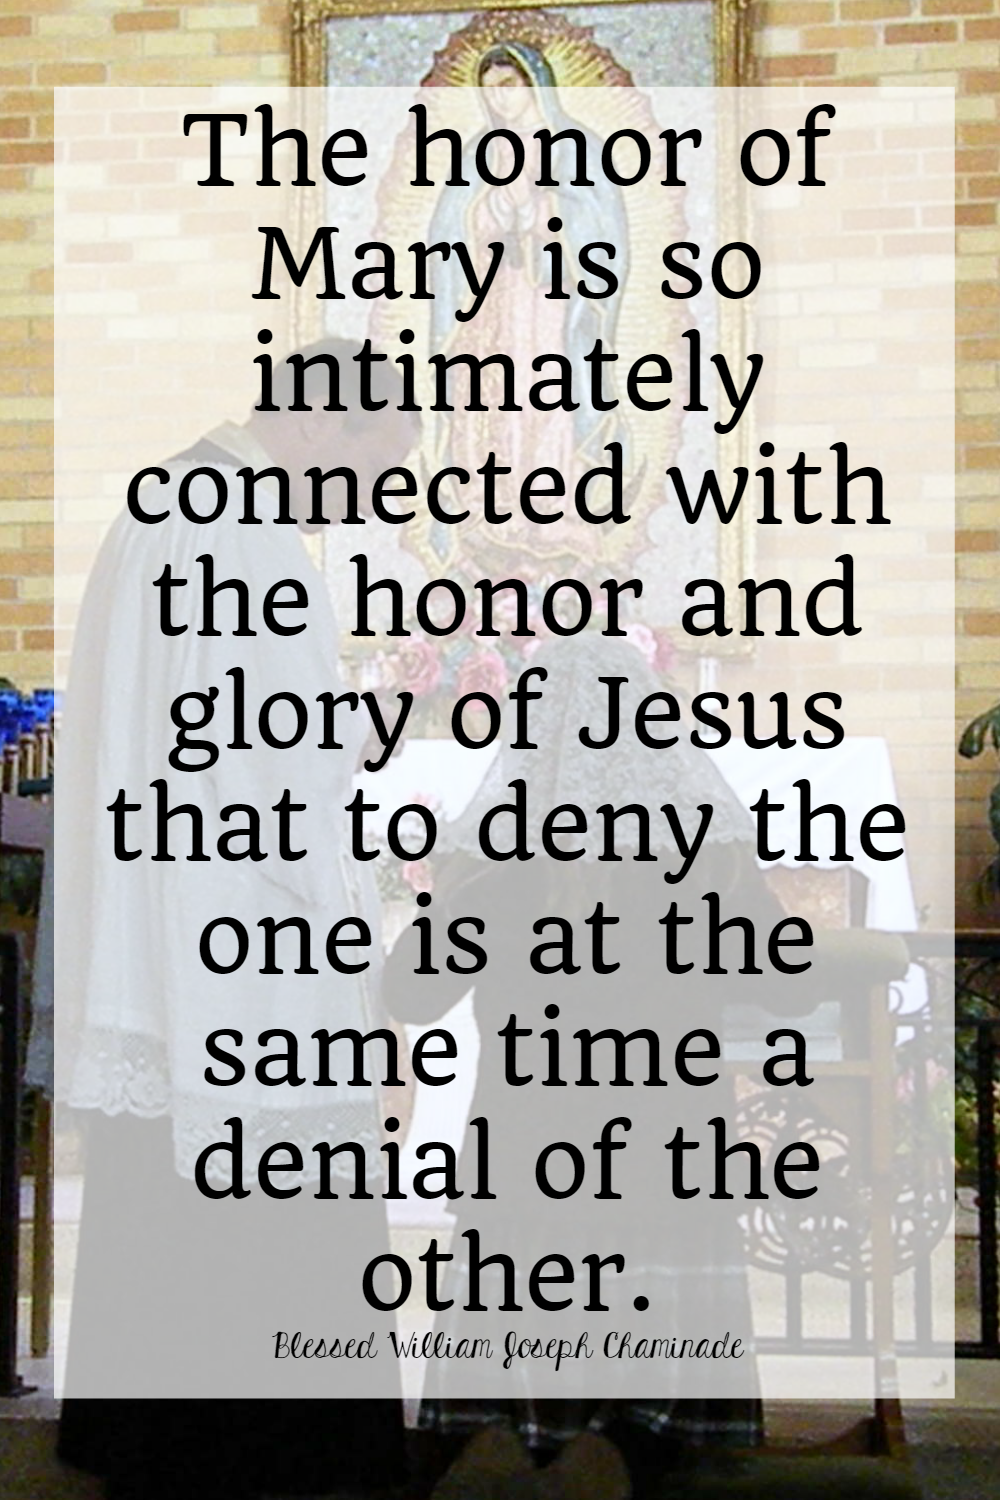 Honour of Mary